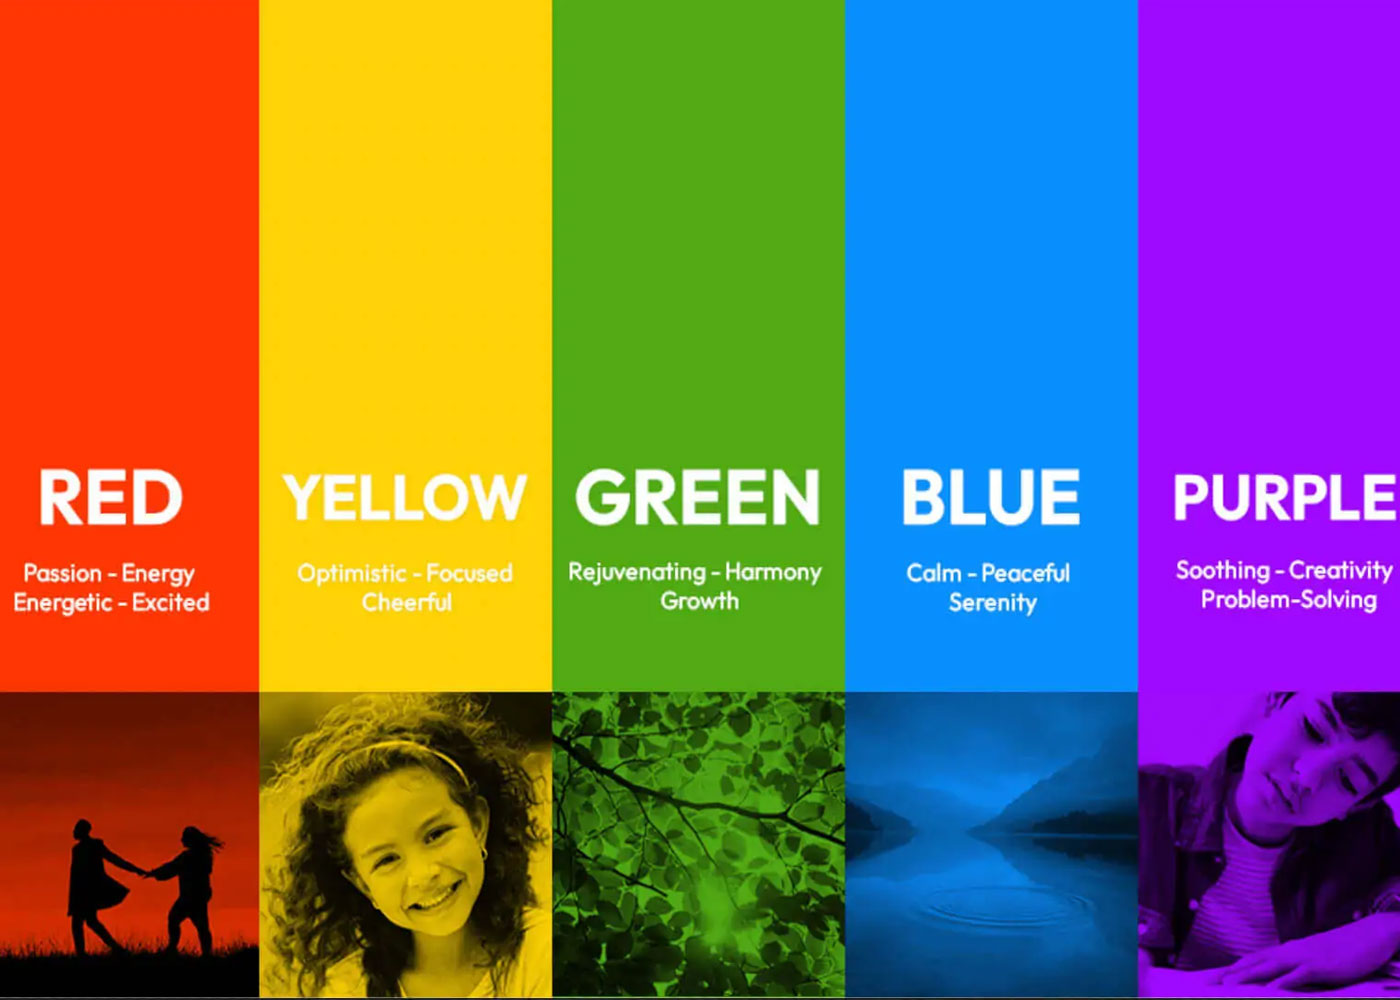 The Psychology of Color in Web Design: How Color Choices Impact User Experience (UX)